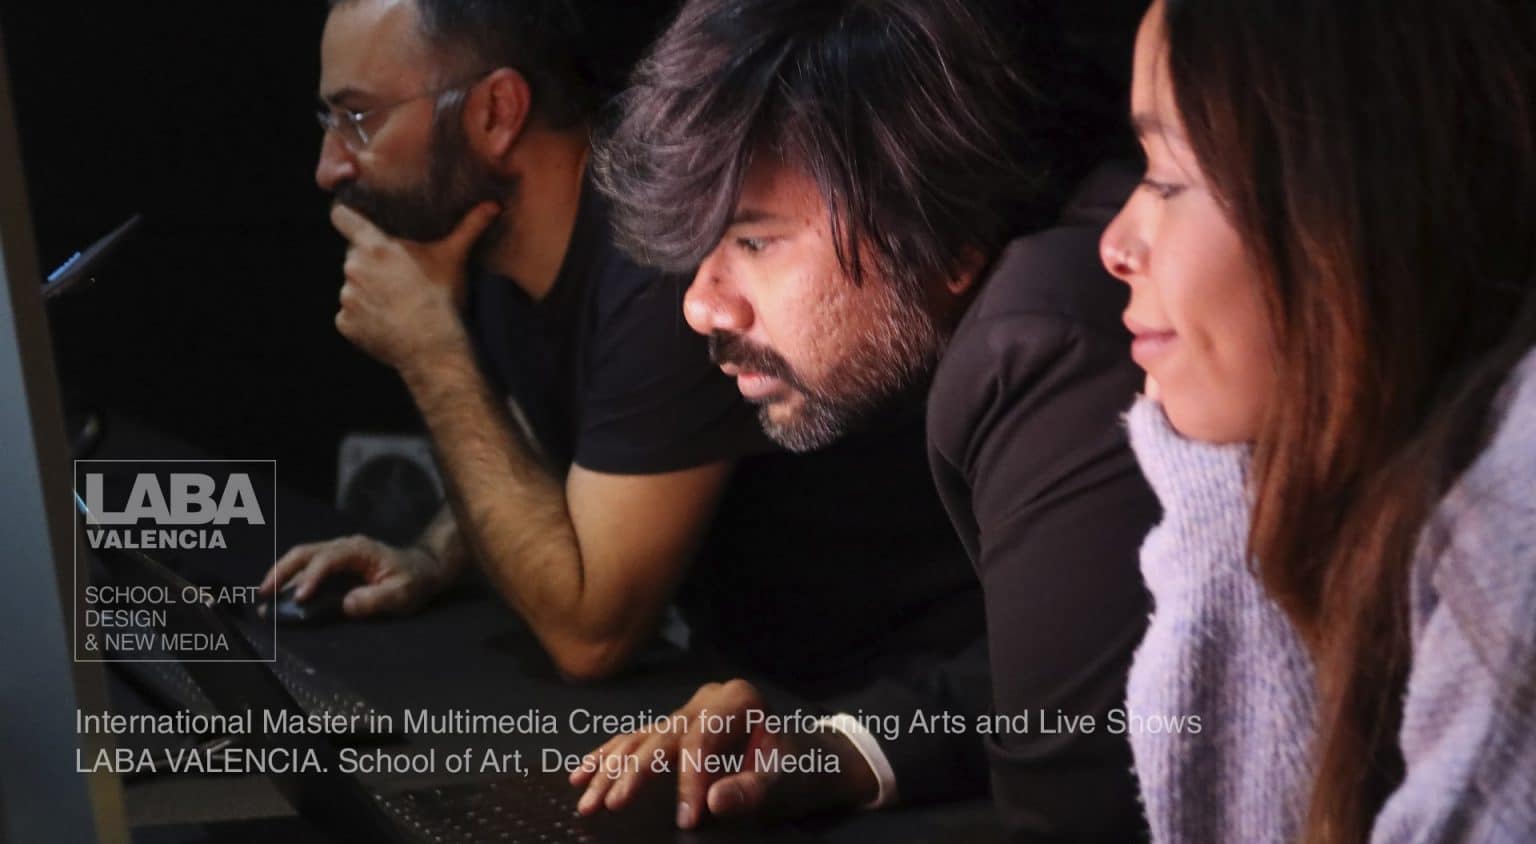 LABA Valencia - International Master in Multimedia Creation for Performing Arts and Live Shows